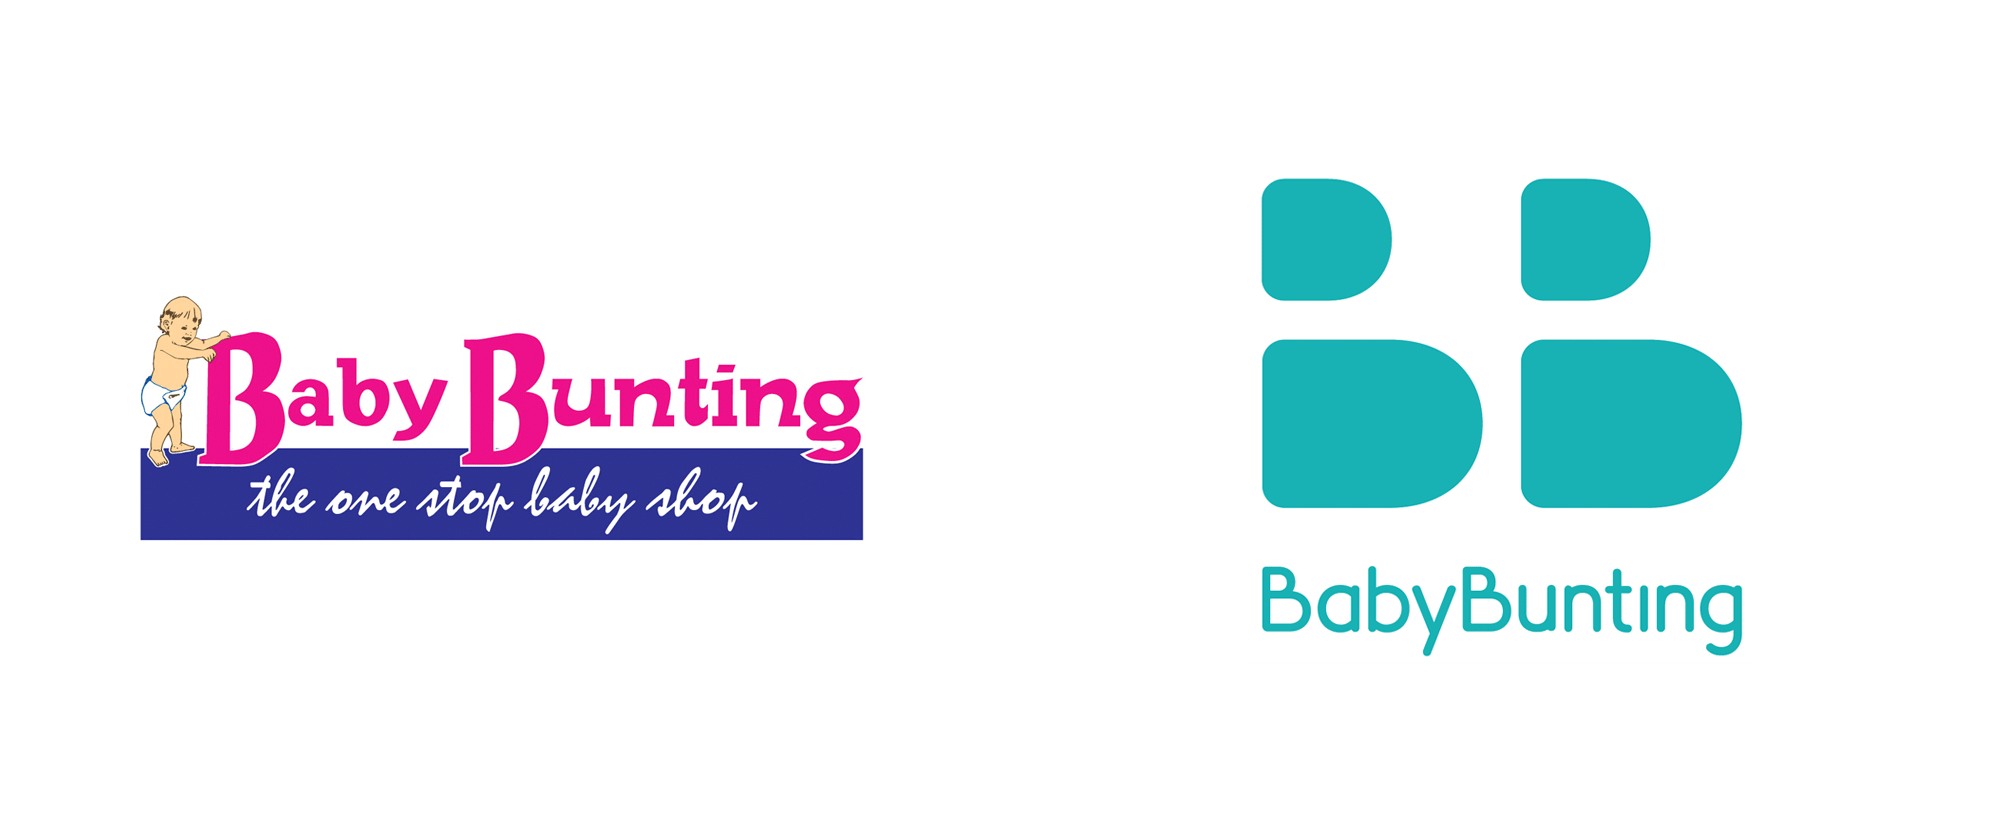 New Logo for Baby Bunting